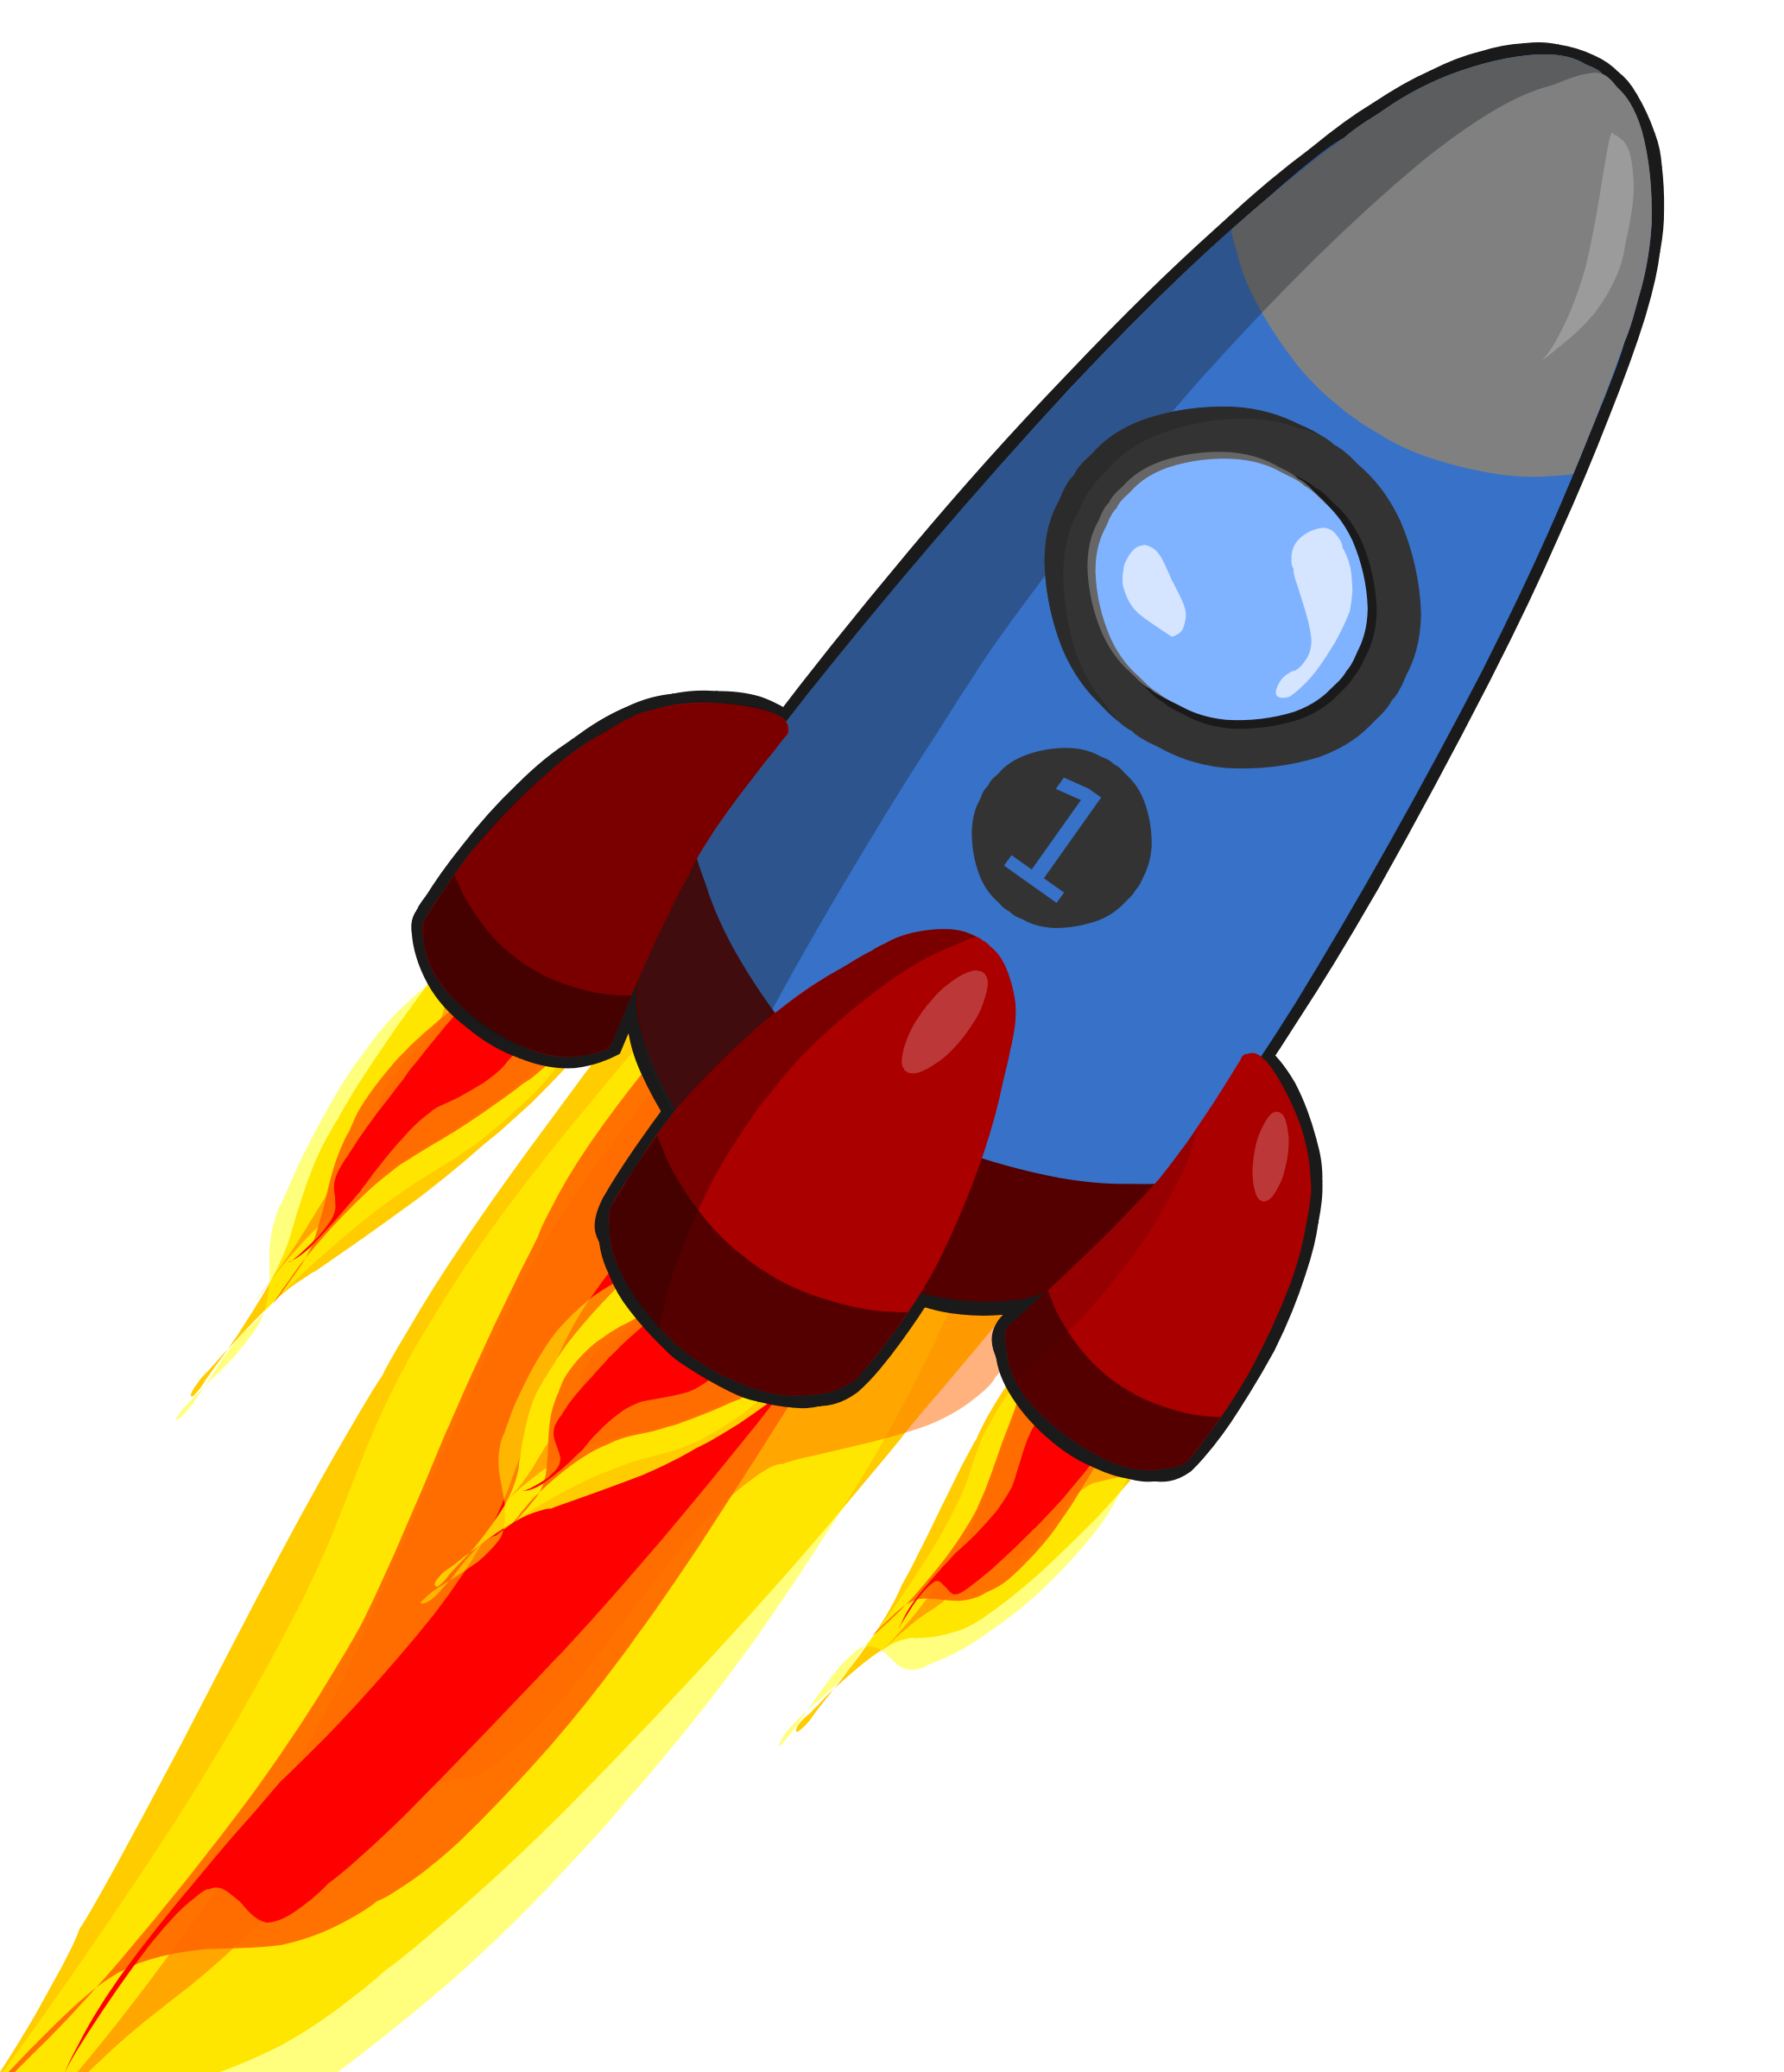 Free Rocket Animated Cliparts, Download Free Clip Art, Free